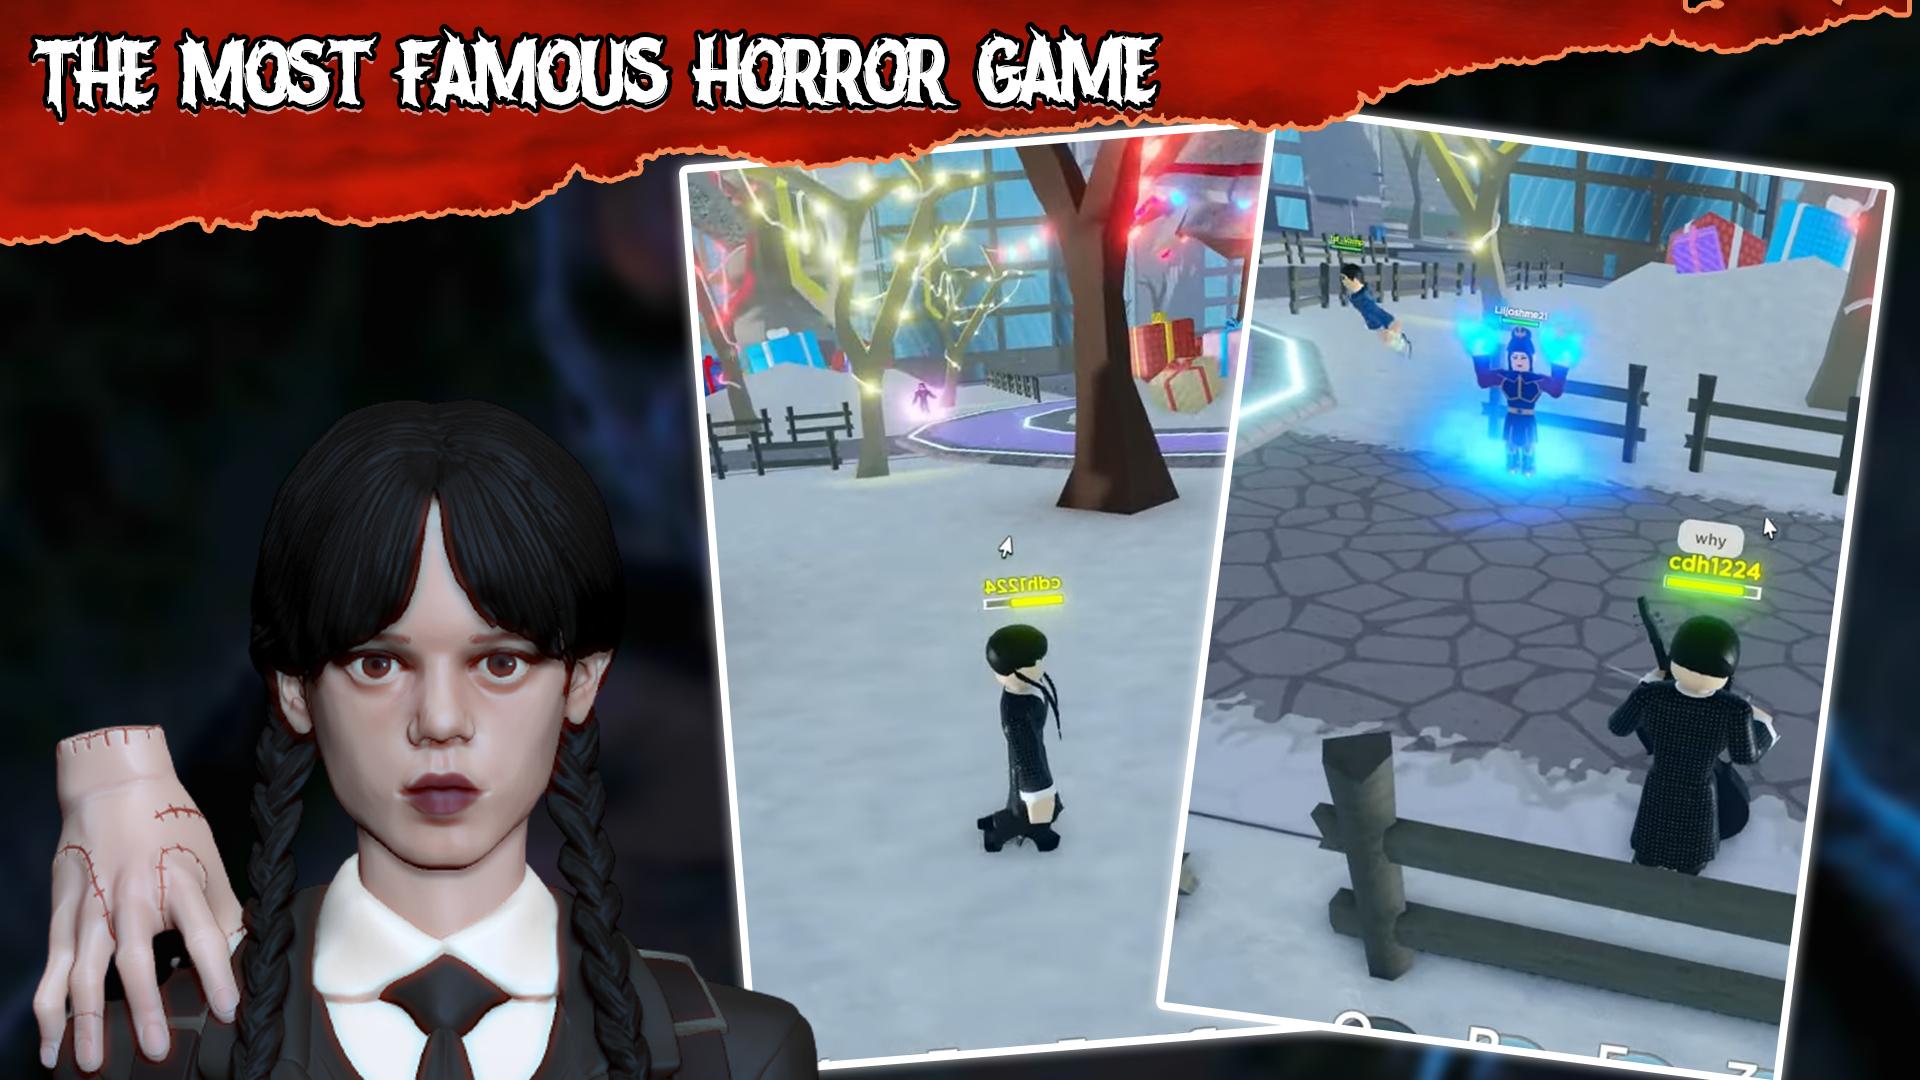 Wednesday Addams Game puzzle for Android - Download